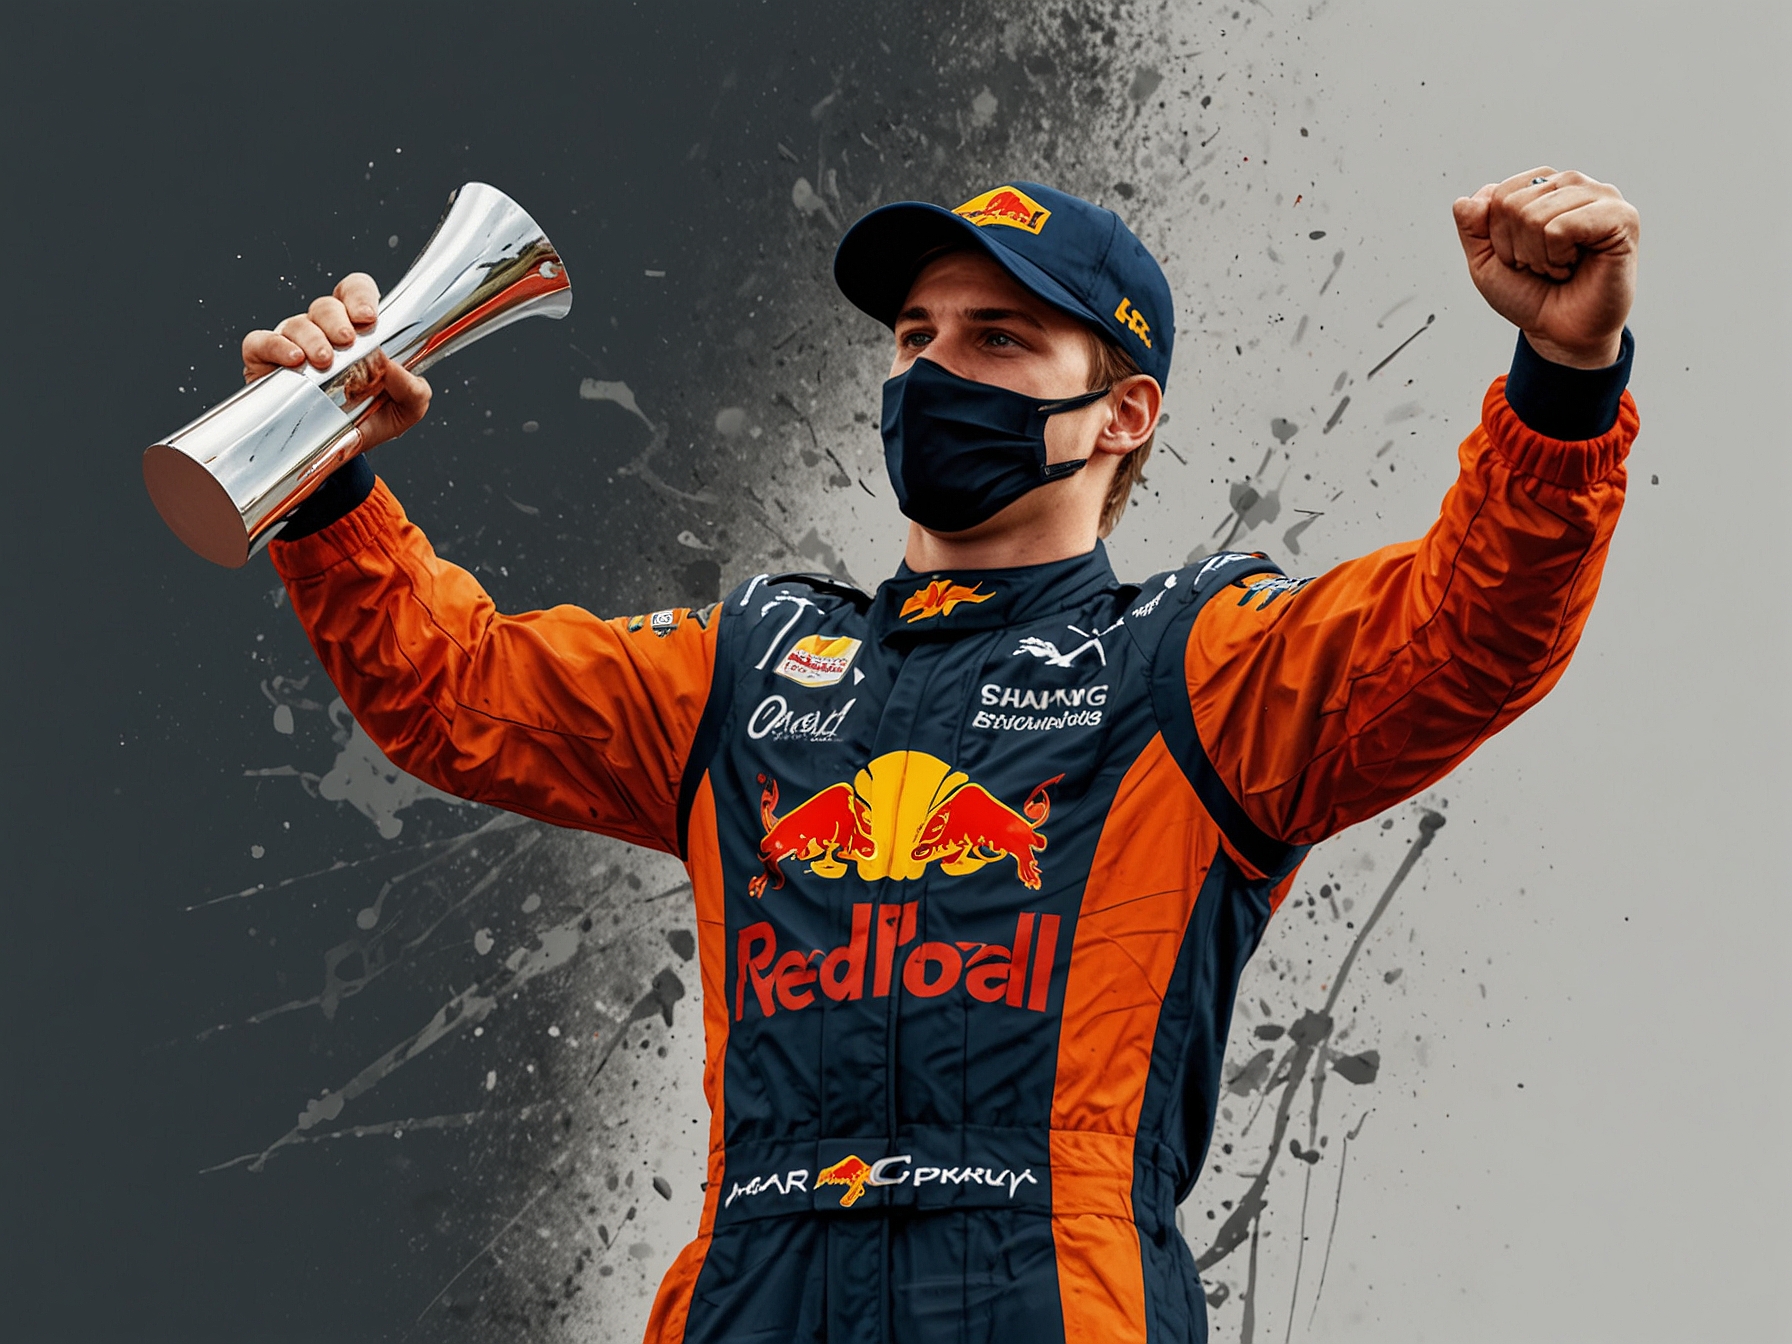 Max Verstappen stands triumphantly with his third World Championship trophy, reflecting the dedication and skill that have defined his illustrious career in Formula 1.